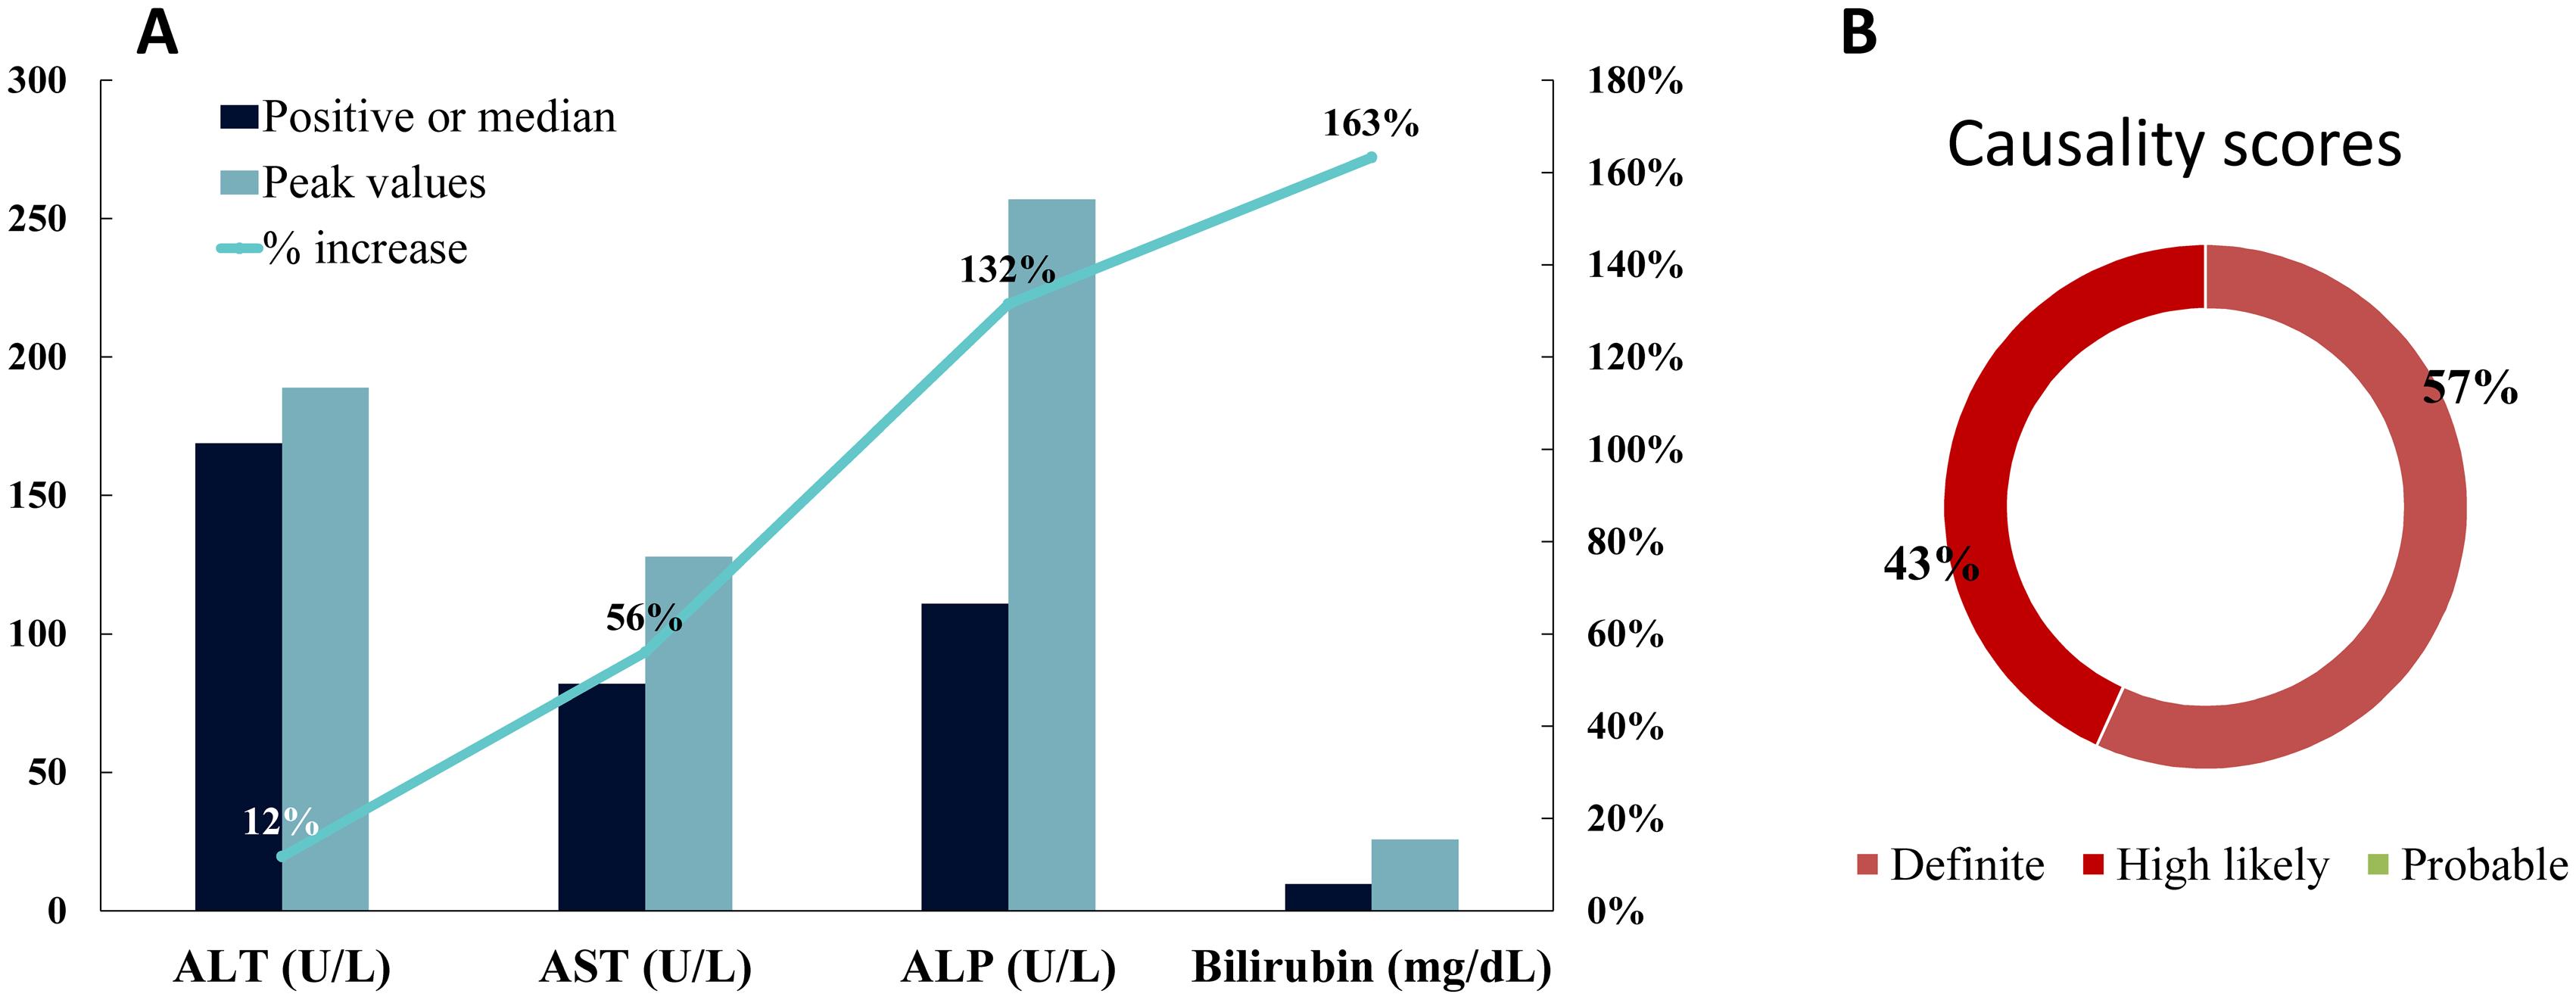 Data of 44 patients who were taking bodybuilding supplements and had elevated aminotransferases, alkaline phosphatase and/or bilirubin.